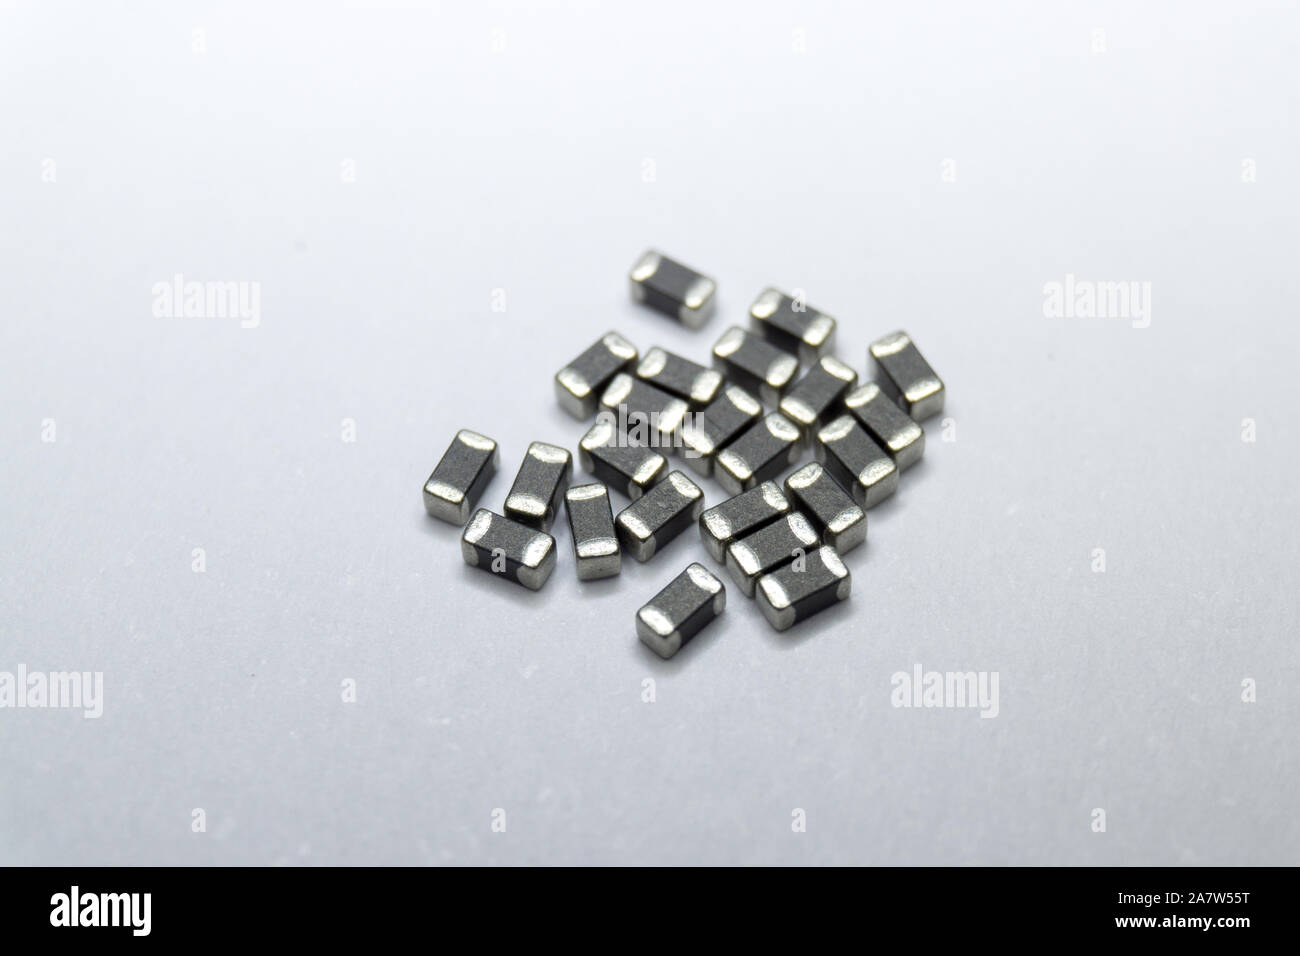 Abstract close-up of grey scattered 0402 SMT surface mount chip ferrite bead power electronics components on white background in random pattern Stock Photo